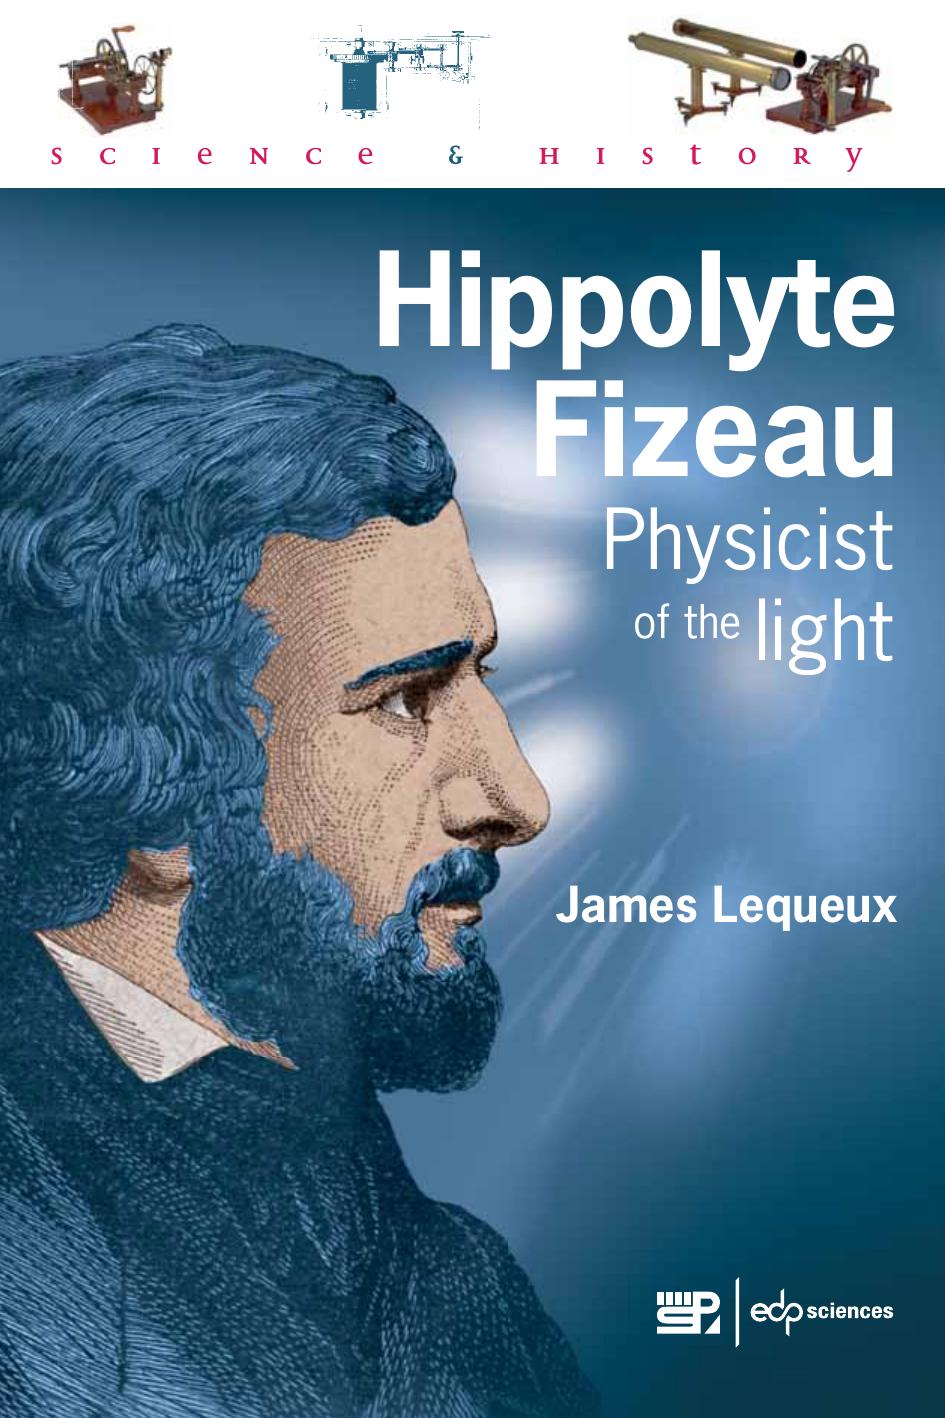 Hippolyte Fizeau : Physicist of the Light by James Lequeux